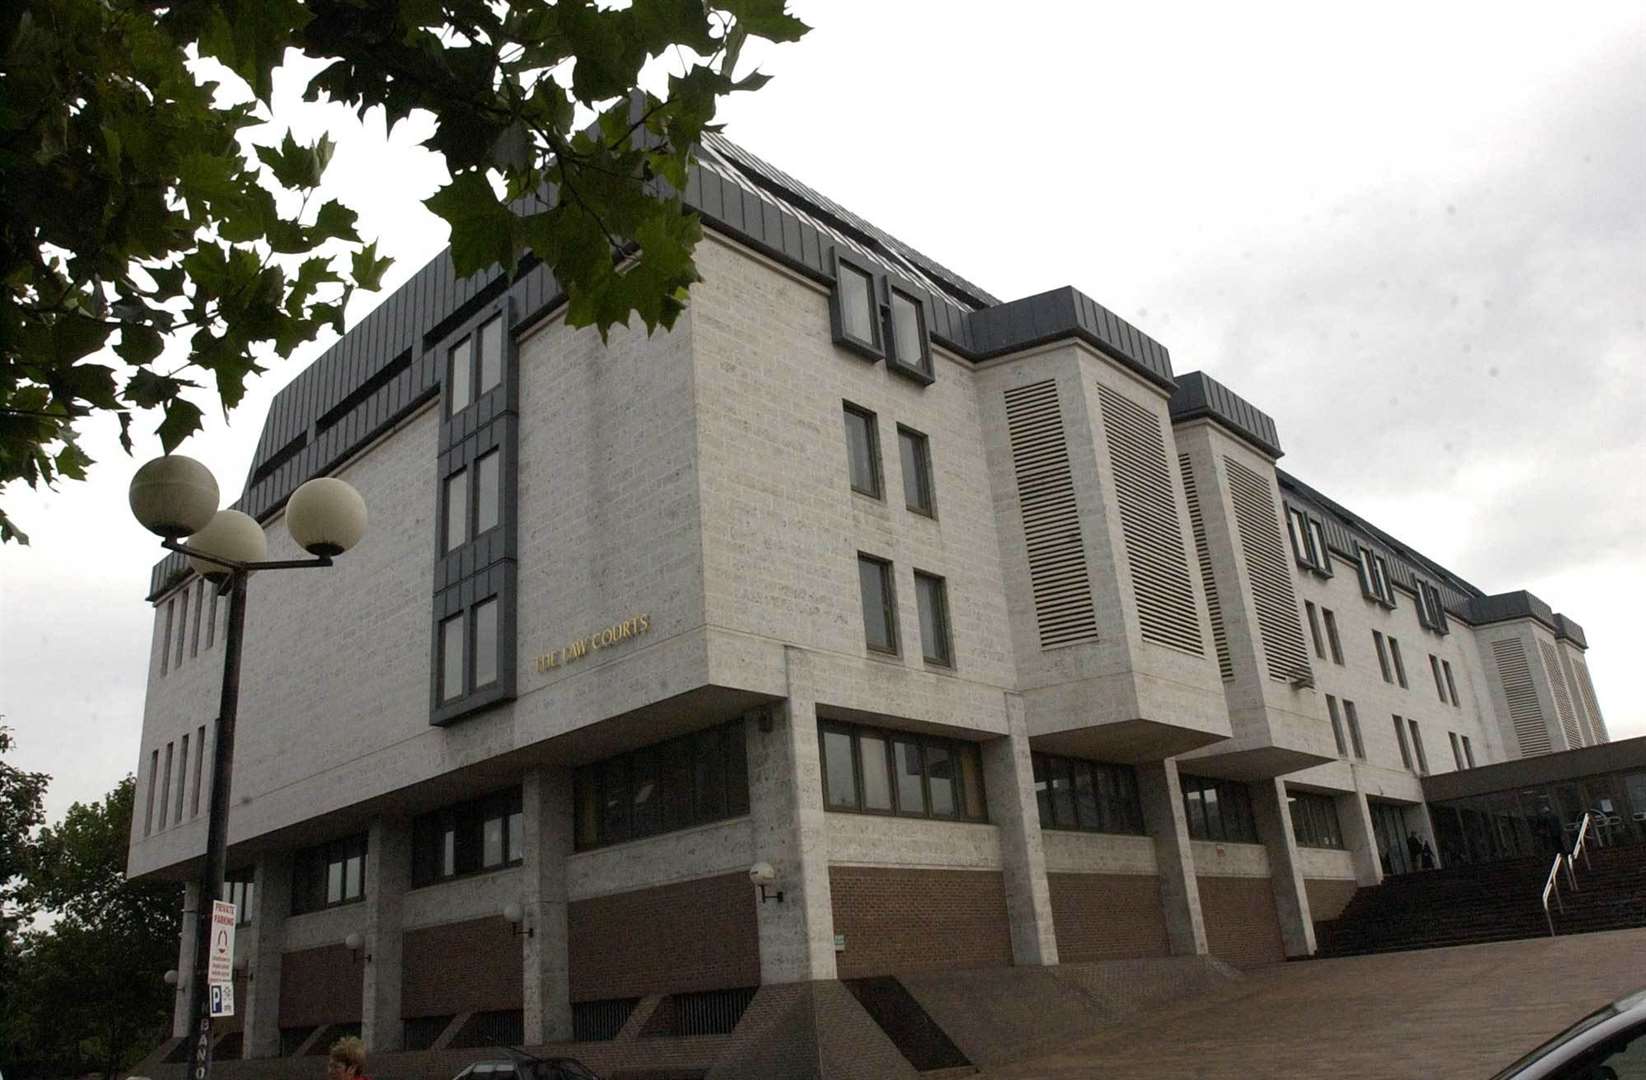 He admitted to the assault at Maidstone Crown Court